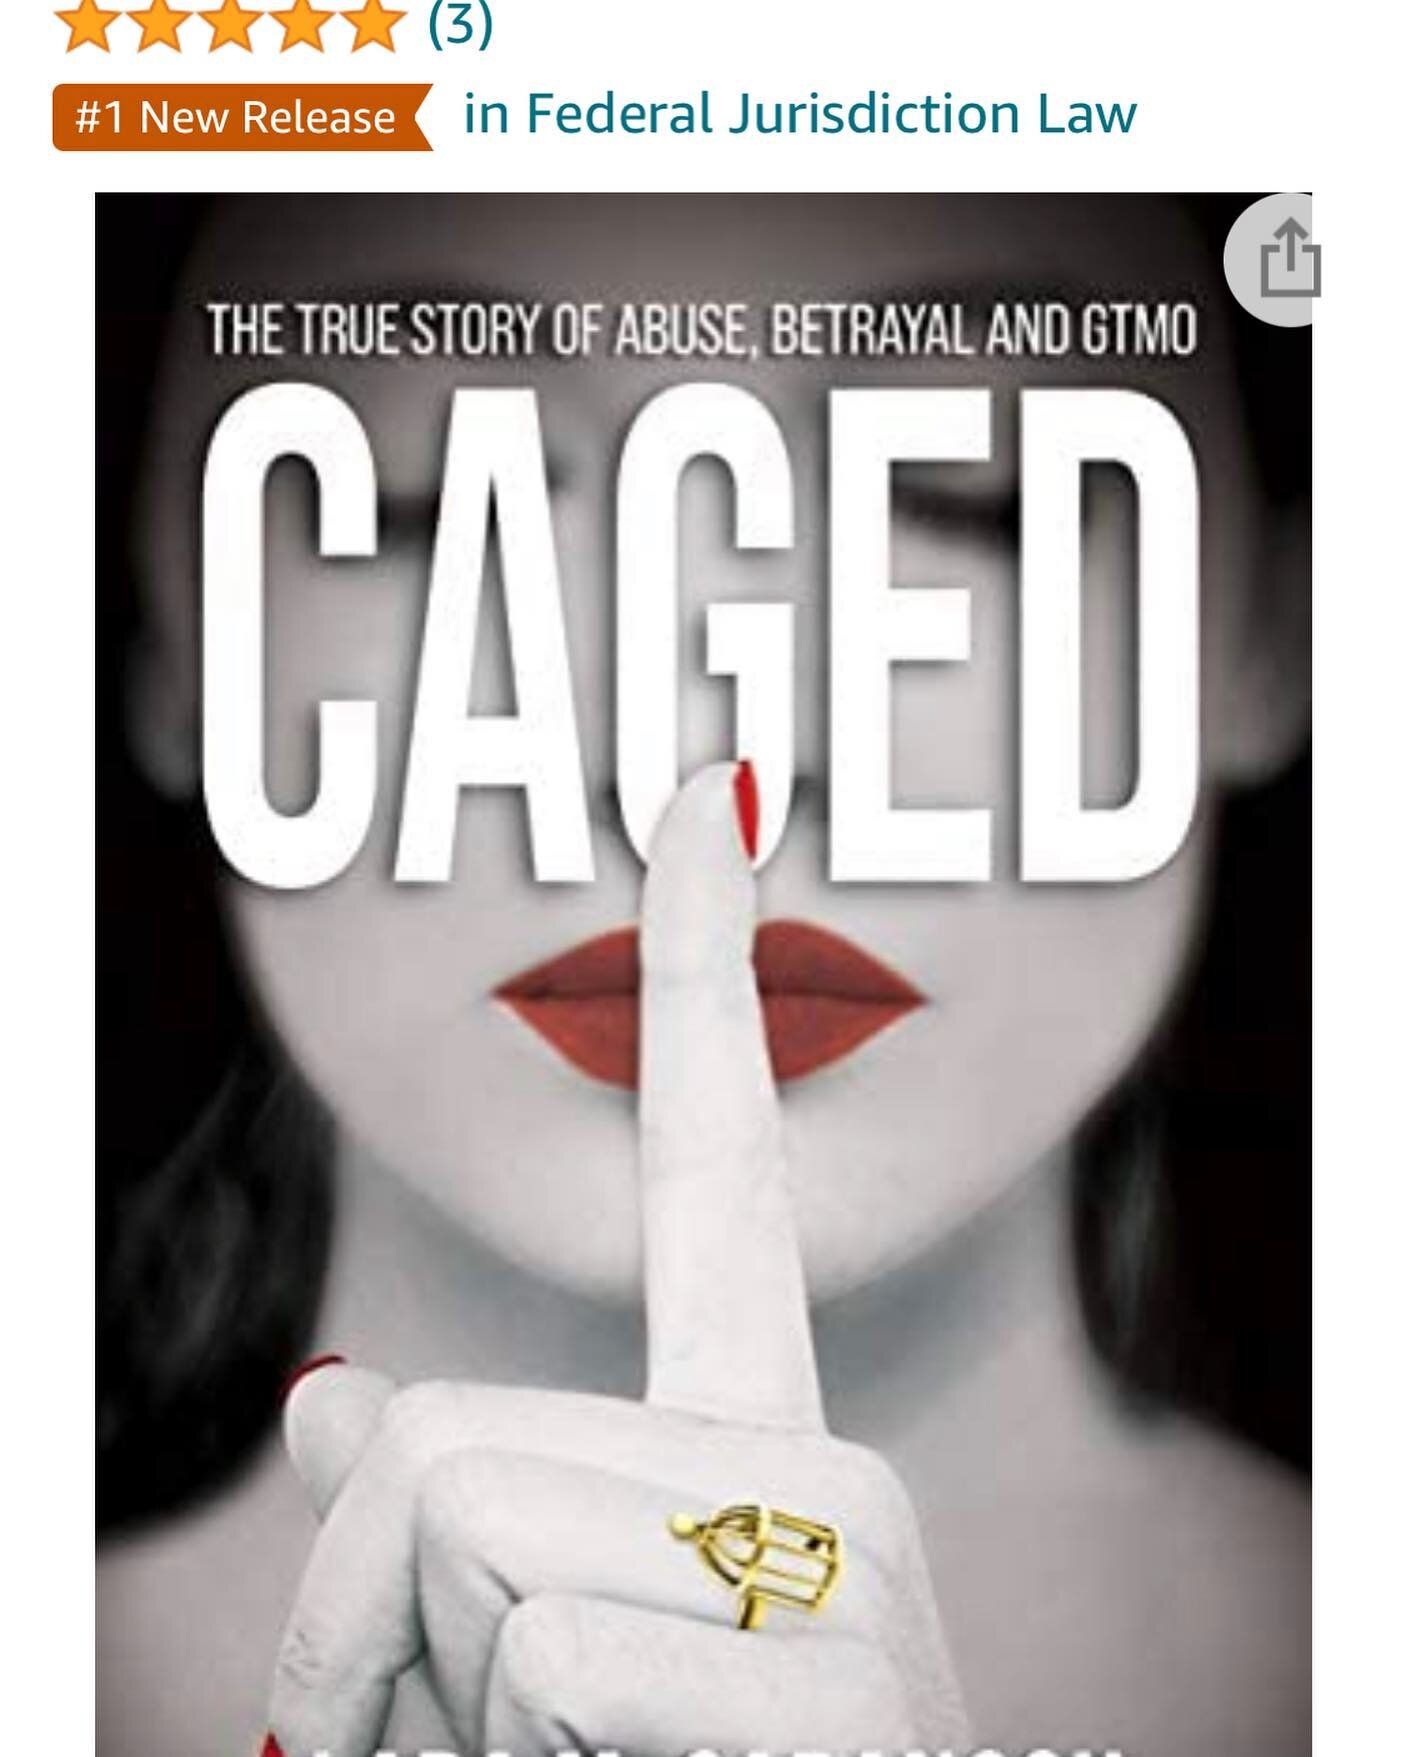 CAGED launched November 30th and we&rsquo;ve been #1 New Release since!!! So proud of the support and positive feedback we have received!!❤️❤️❤️ There is so much work to be done for Domestic Violence Awareness - for every voice heard&hellip;we hope t